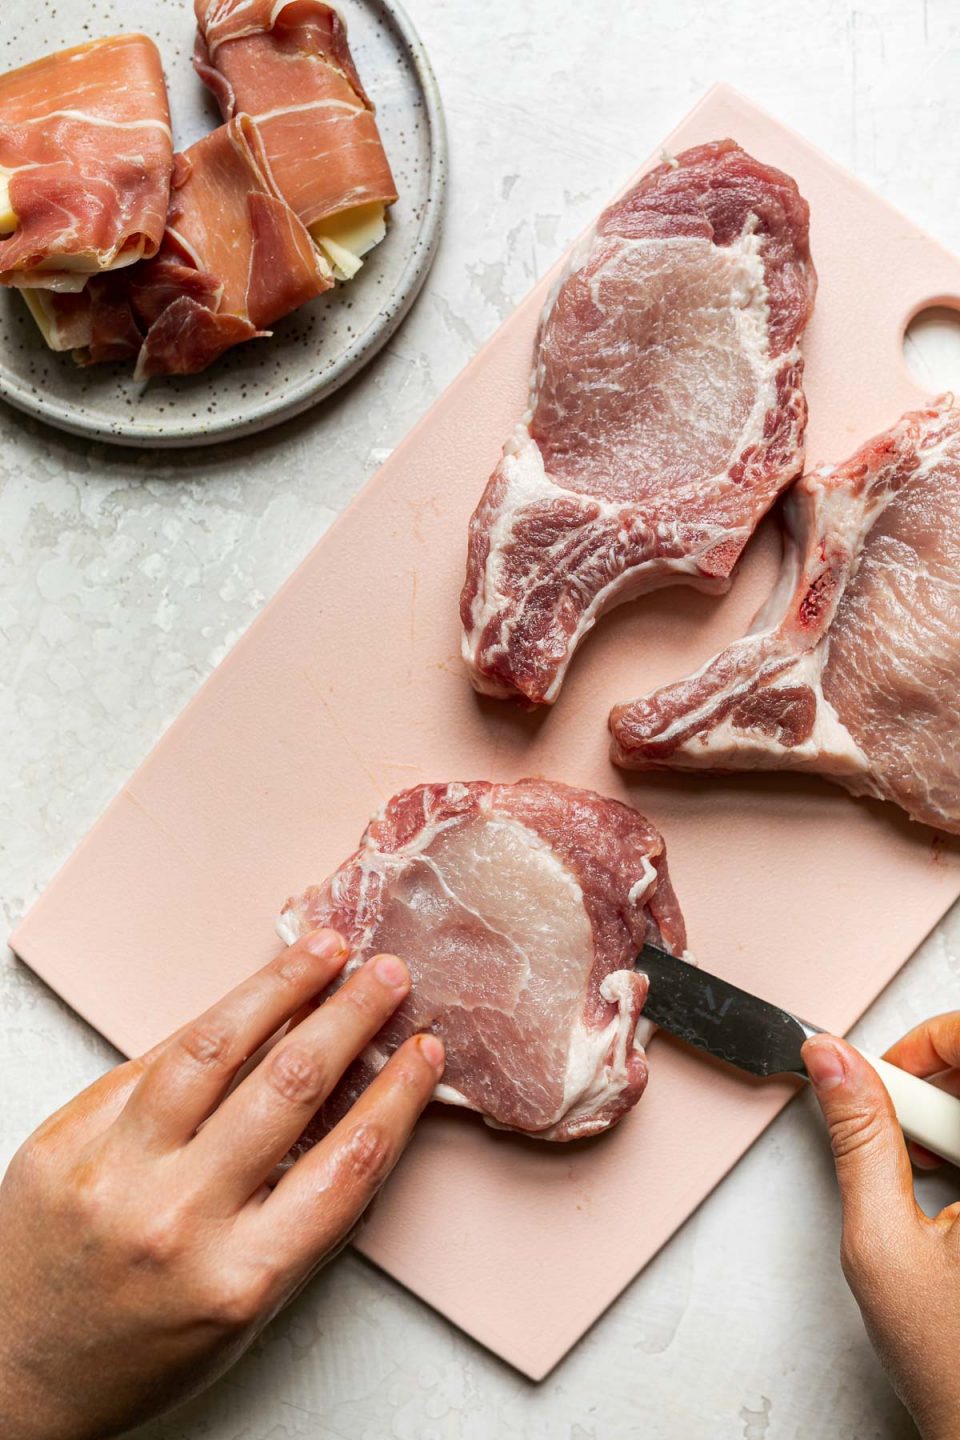 How to Stuff Bone-In Pork Chops – 3 bone-in pork chops on a pink cutting board on a creamy cement surface. A woman's hands hold one of the pork chops, using a paring knife to cut a pocket through its center. Next to the cutting board is a small plate of prosciutto-warapped asiago cheese.